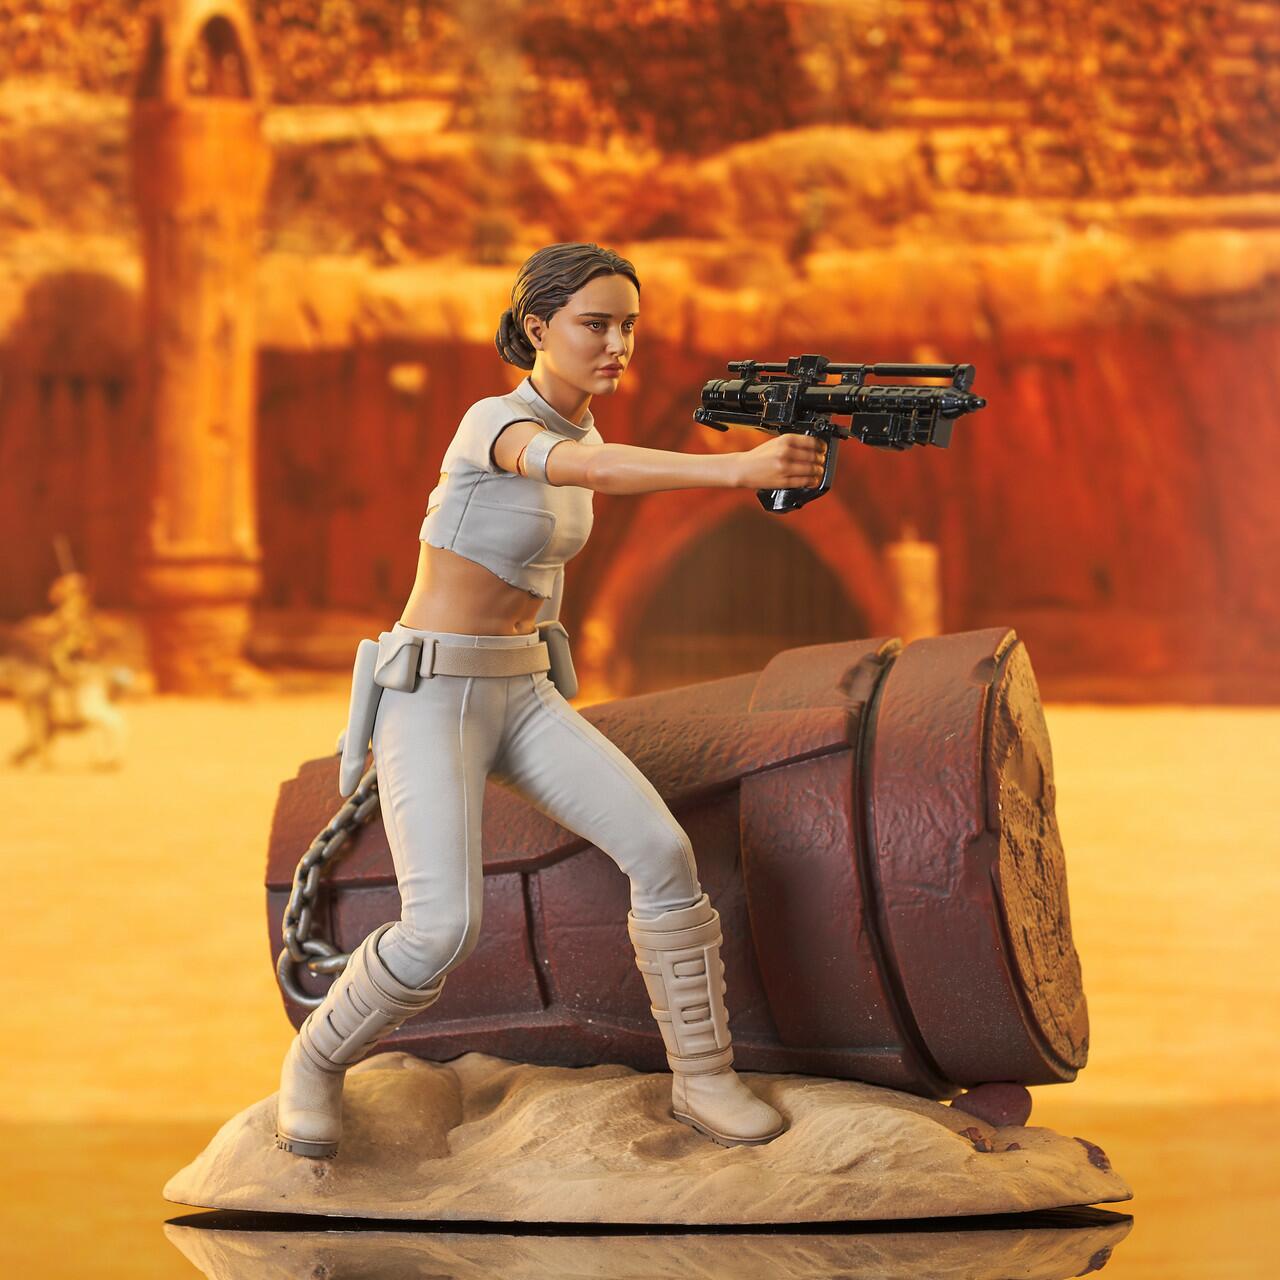 Gentle Giant - Star Wars Attack of the Clones™ - Padme Amidala™ Premier Collection Statue (84110)